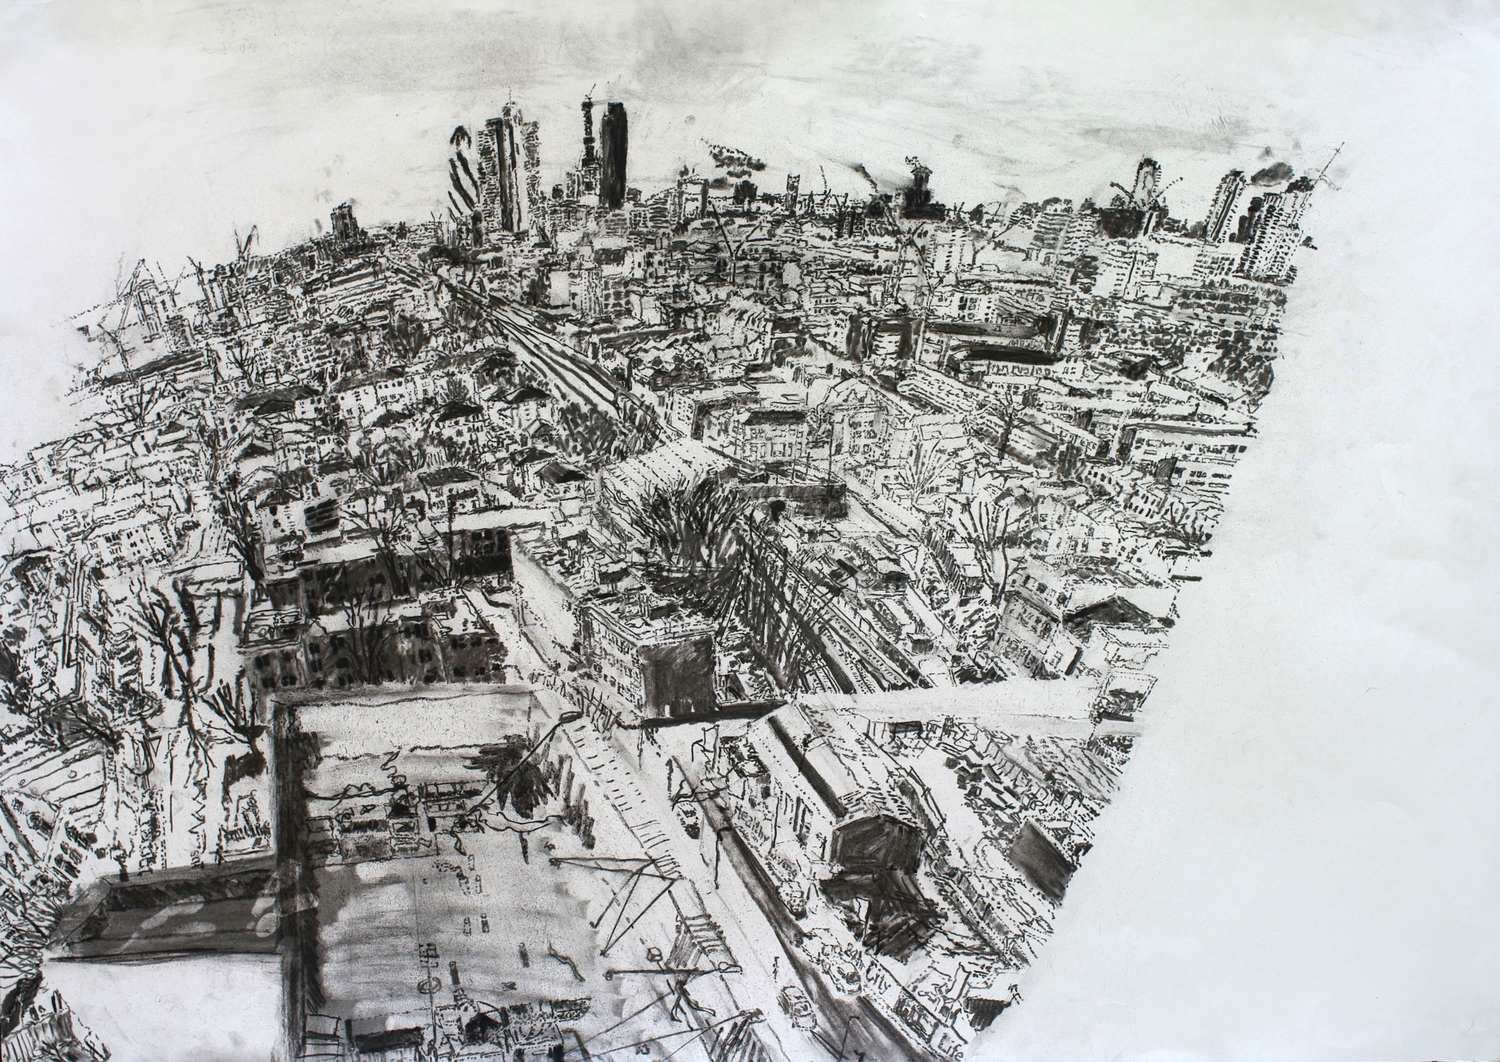 Charcoal_drawing_by_Alexandra_Blum_aerial_city_view_Dalston_Square_Hackney_London.jpg